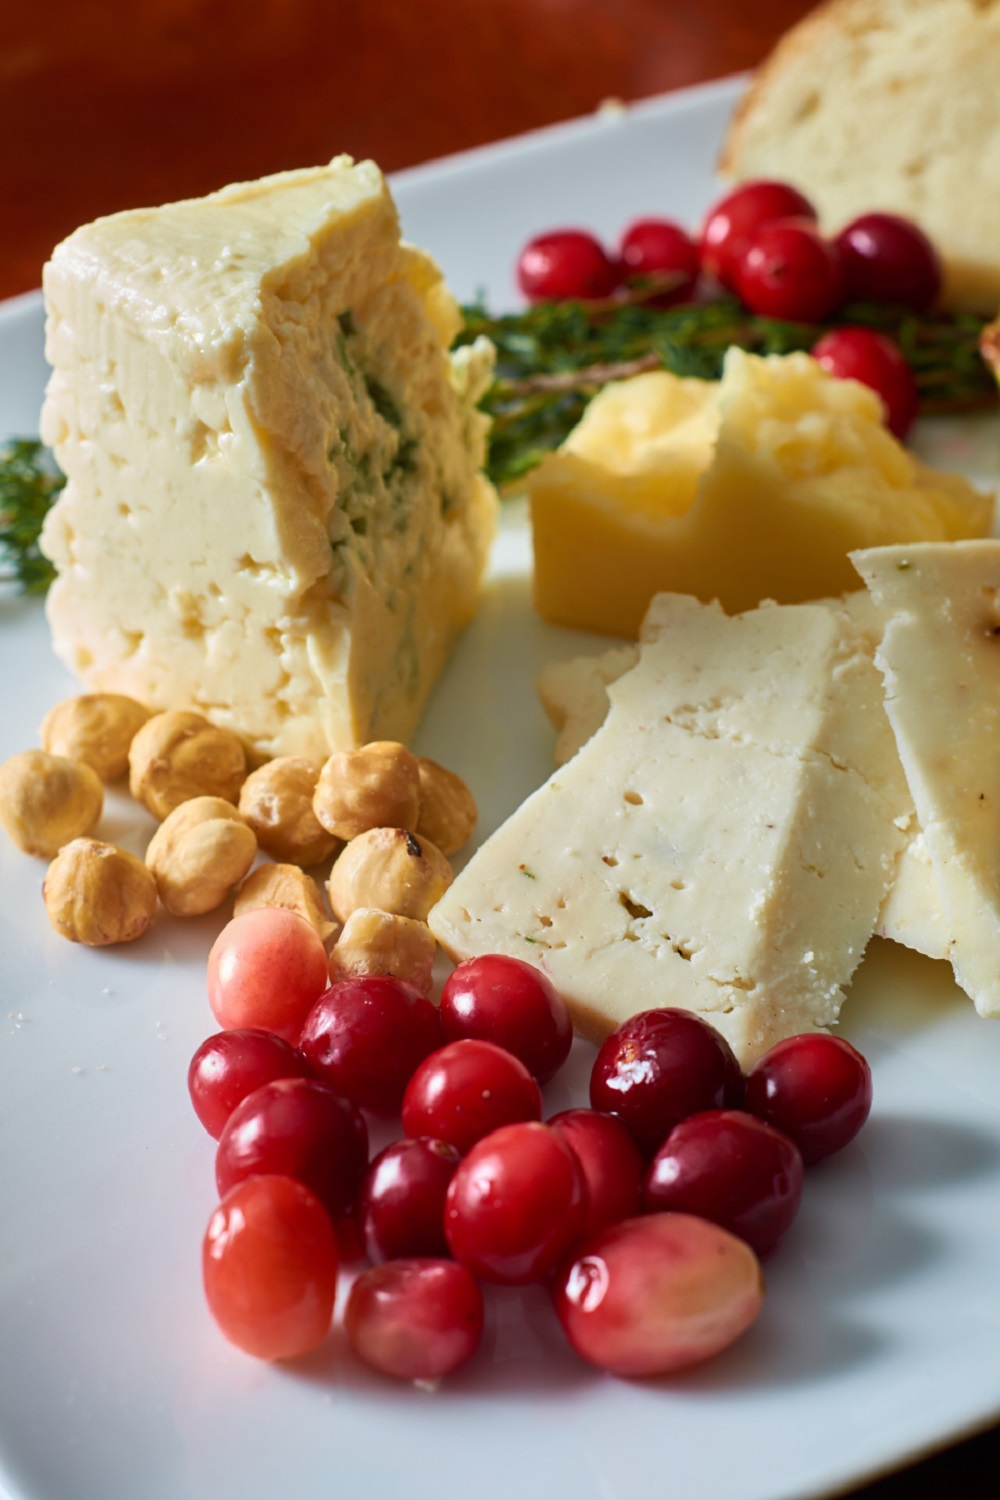 Cheese plate with berries and nuts - pinterest image.